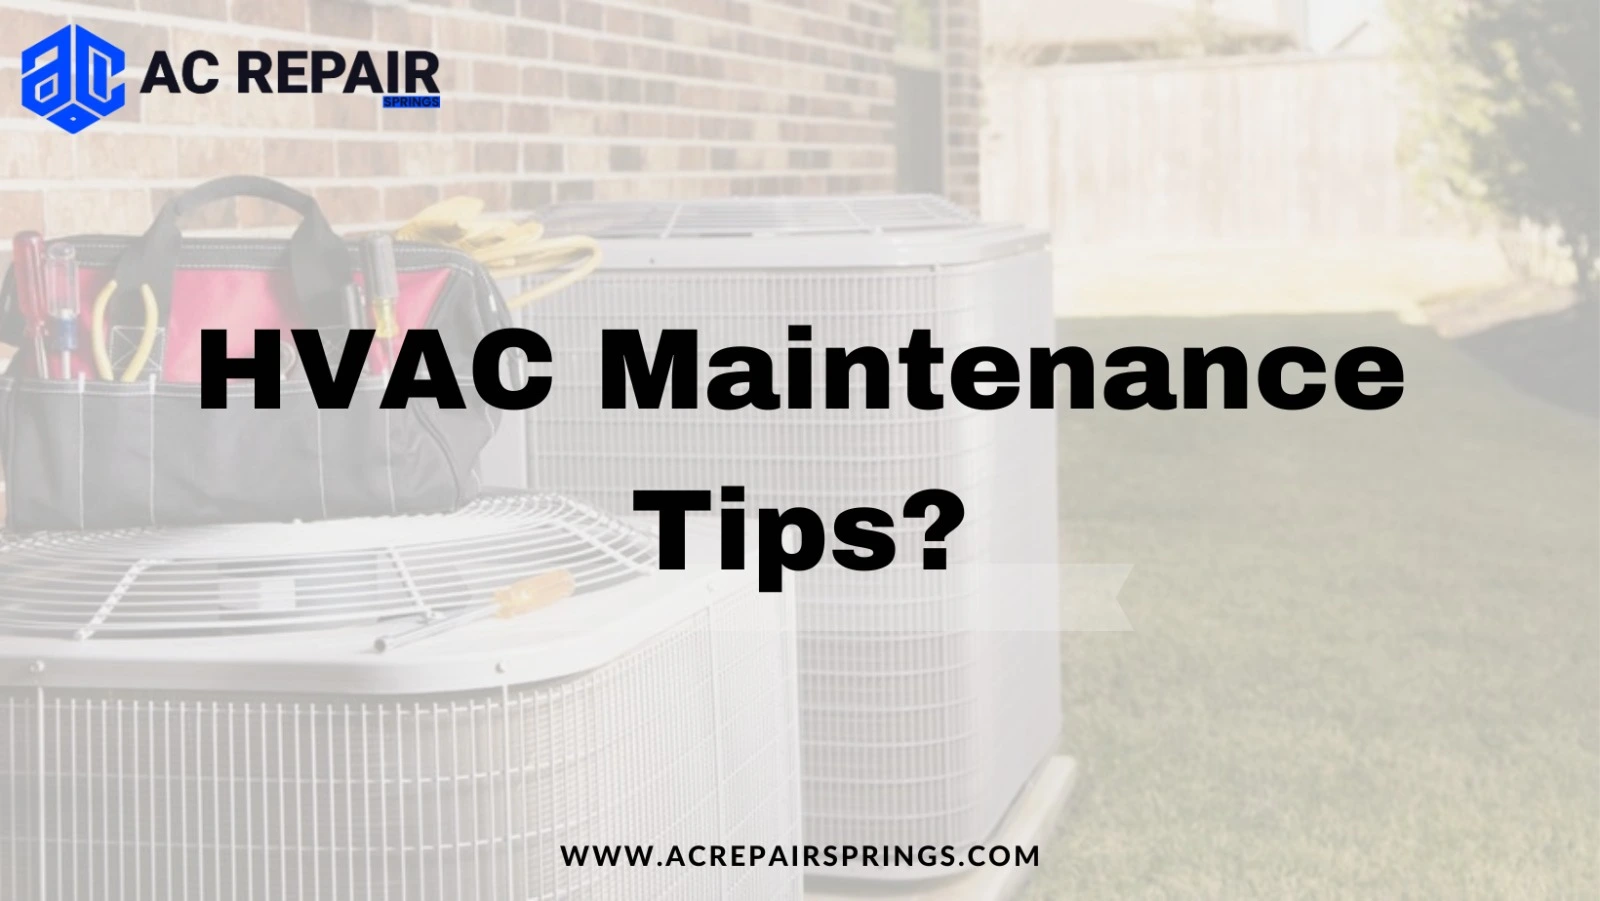 What are the 12 HVAC Maintenance Tips?